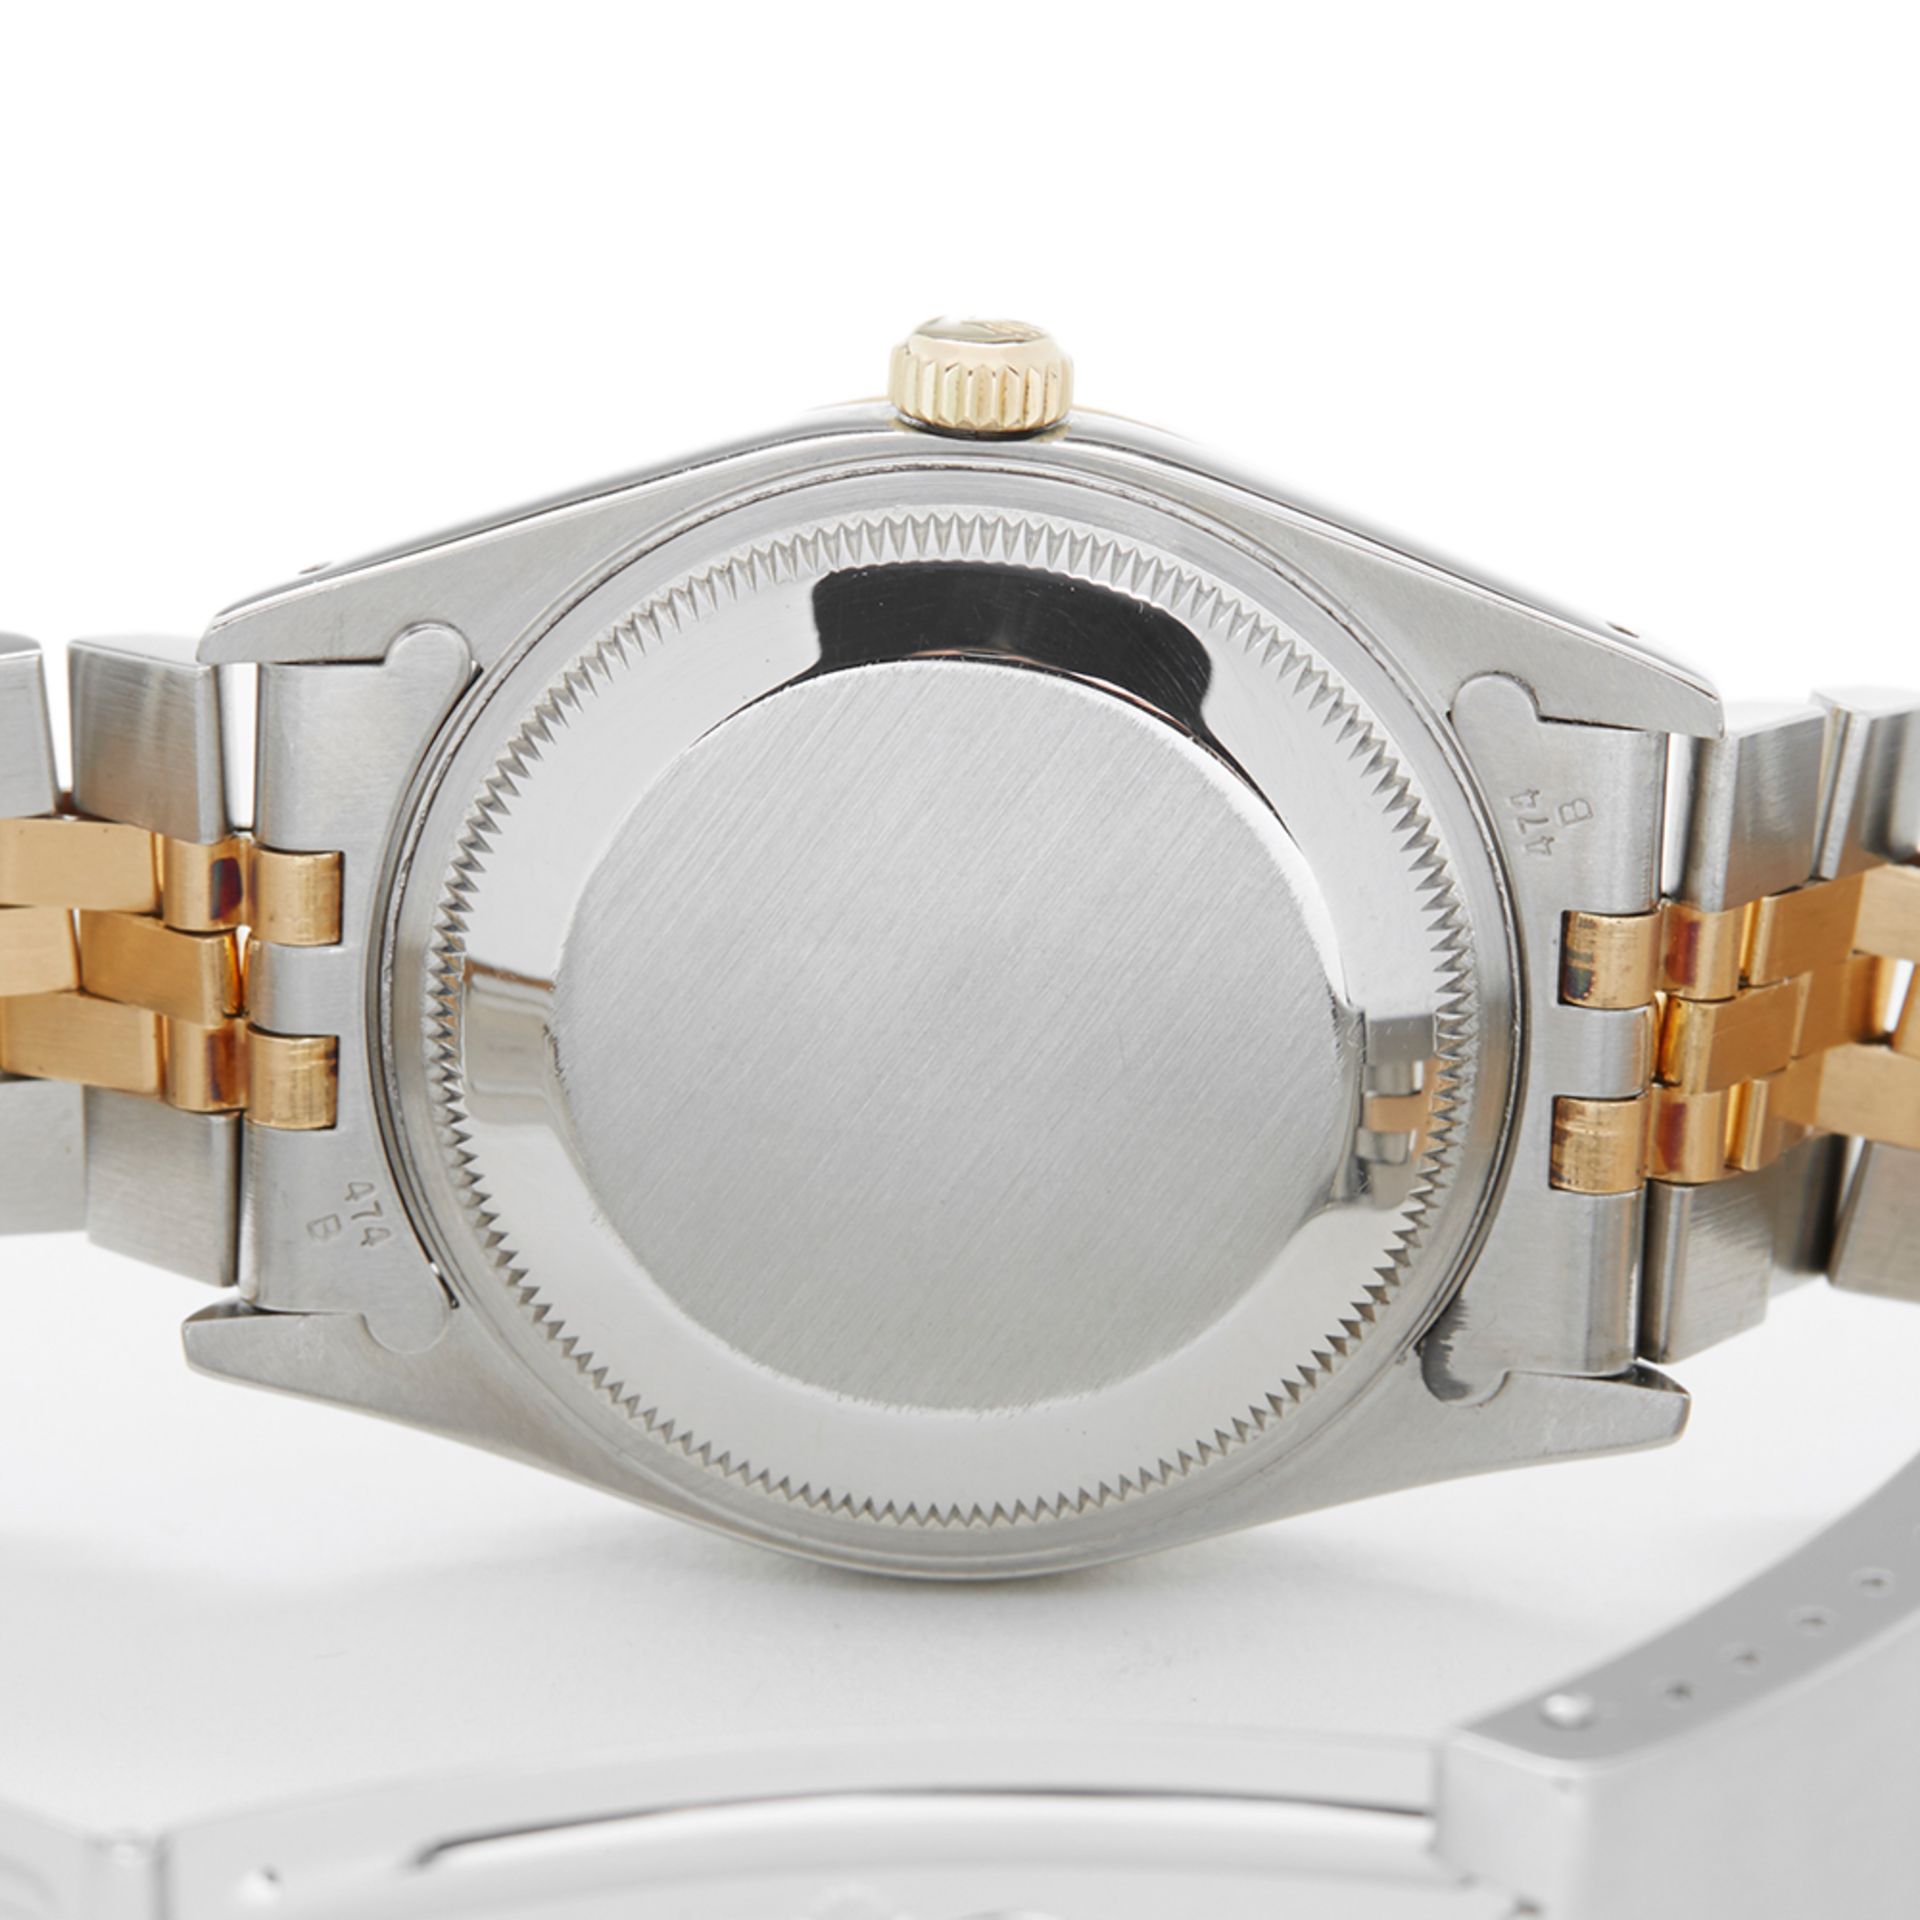 Oyster Perpetual Date 36mm Stainless Steel & 18k Yellow Gold 15233 - Image 8 of 8